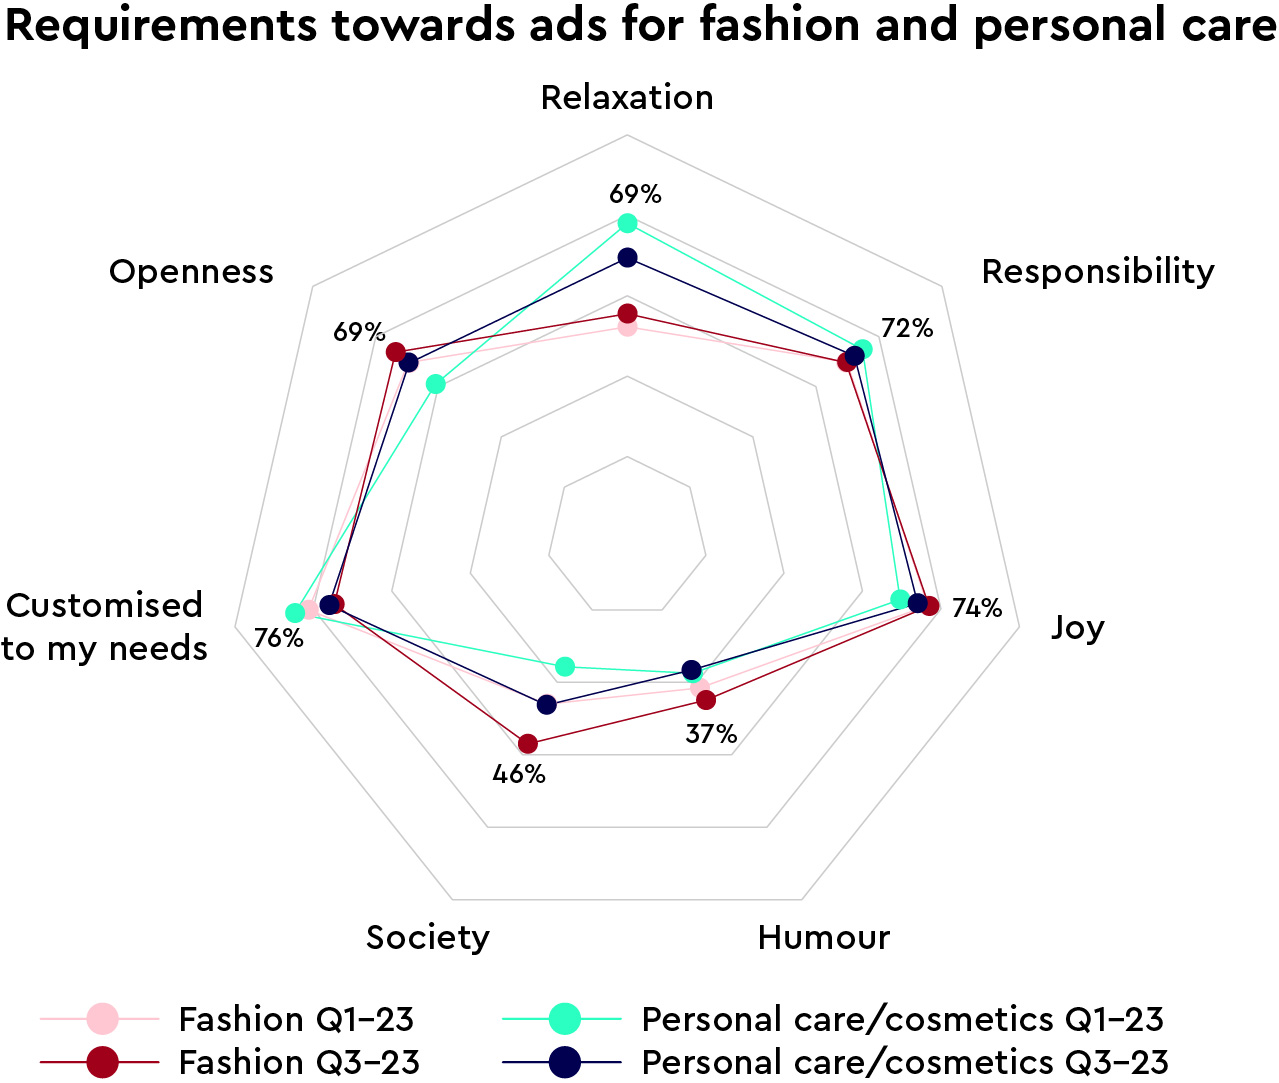 Chart showing requirements for fashion and personal care